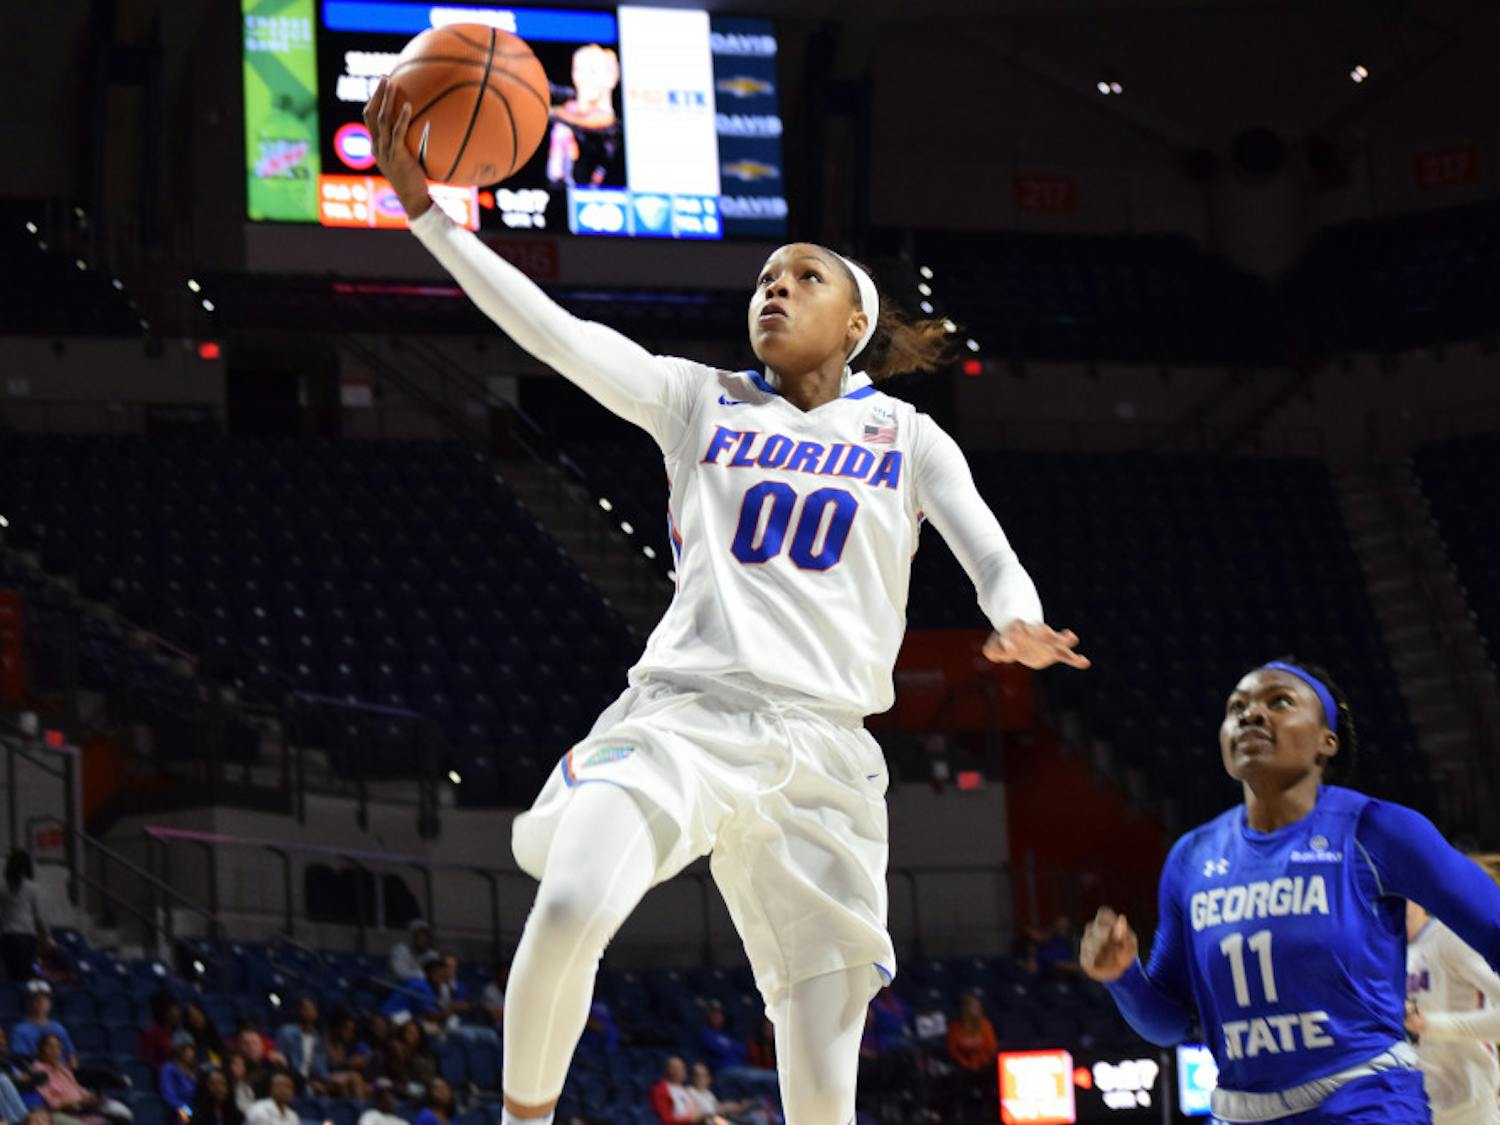 Guard Delicia Washington released her potential game-winning layup too late as time expired in regulation. Florida went to overtime with Northwestern and lost, 83-74.